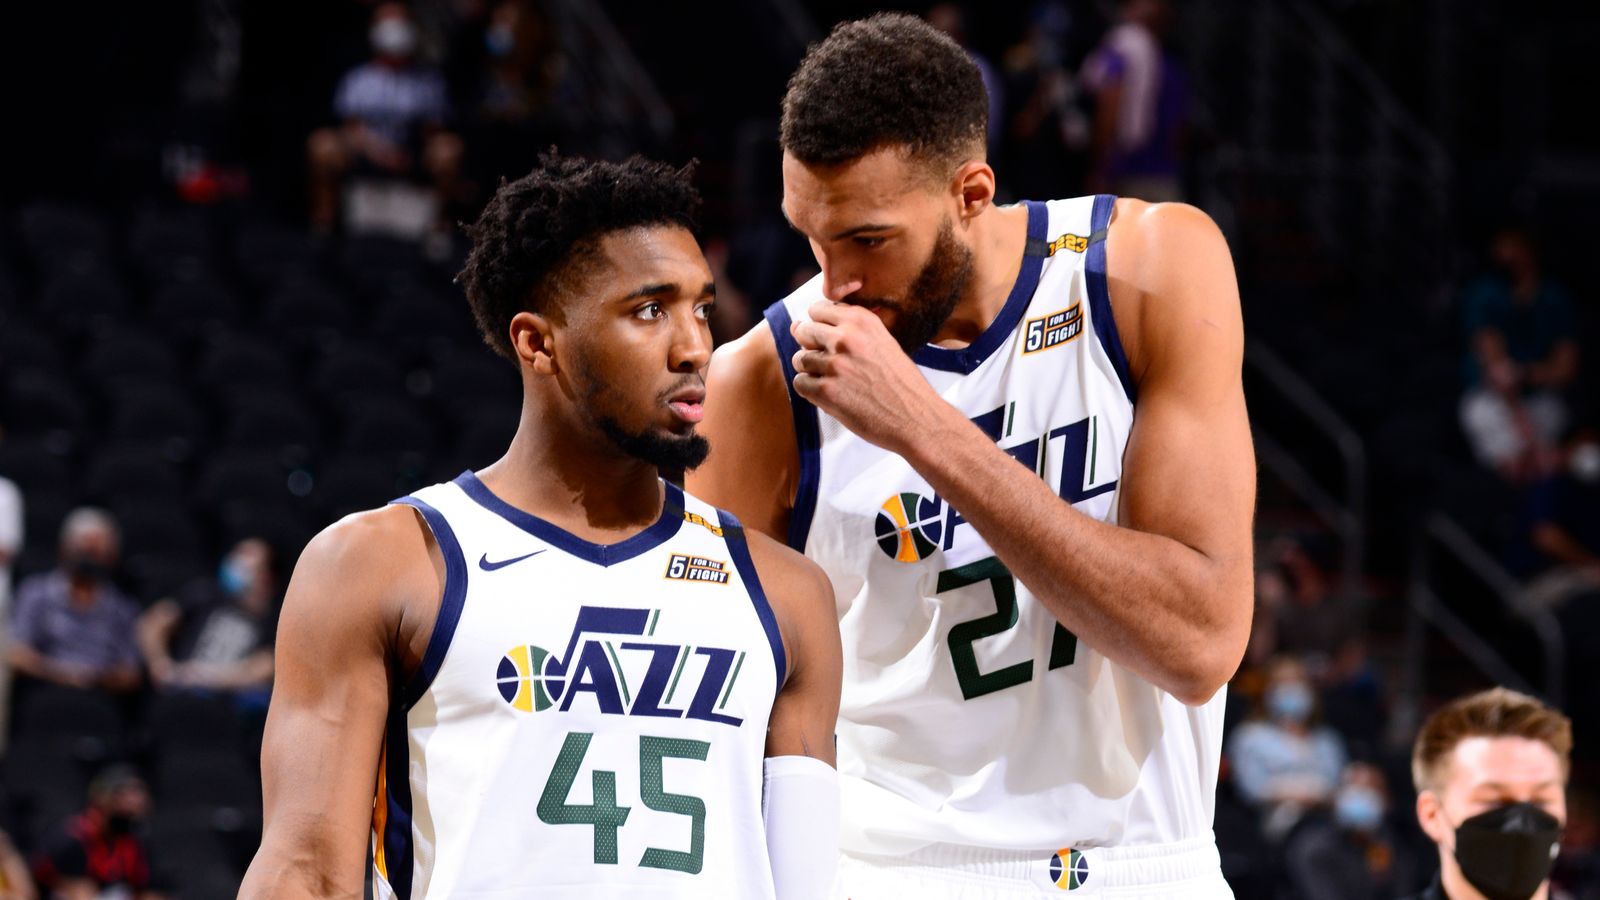 Jordan Clarkson is ready for the return of Donovan Mitchell: 'He's